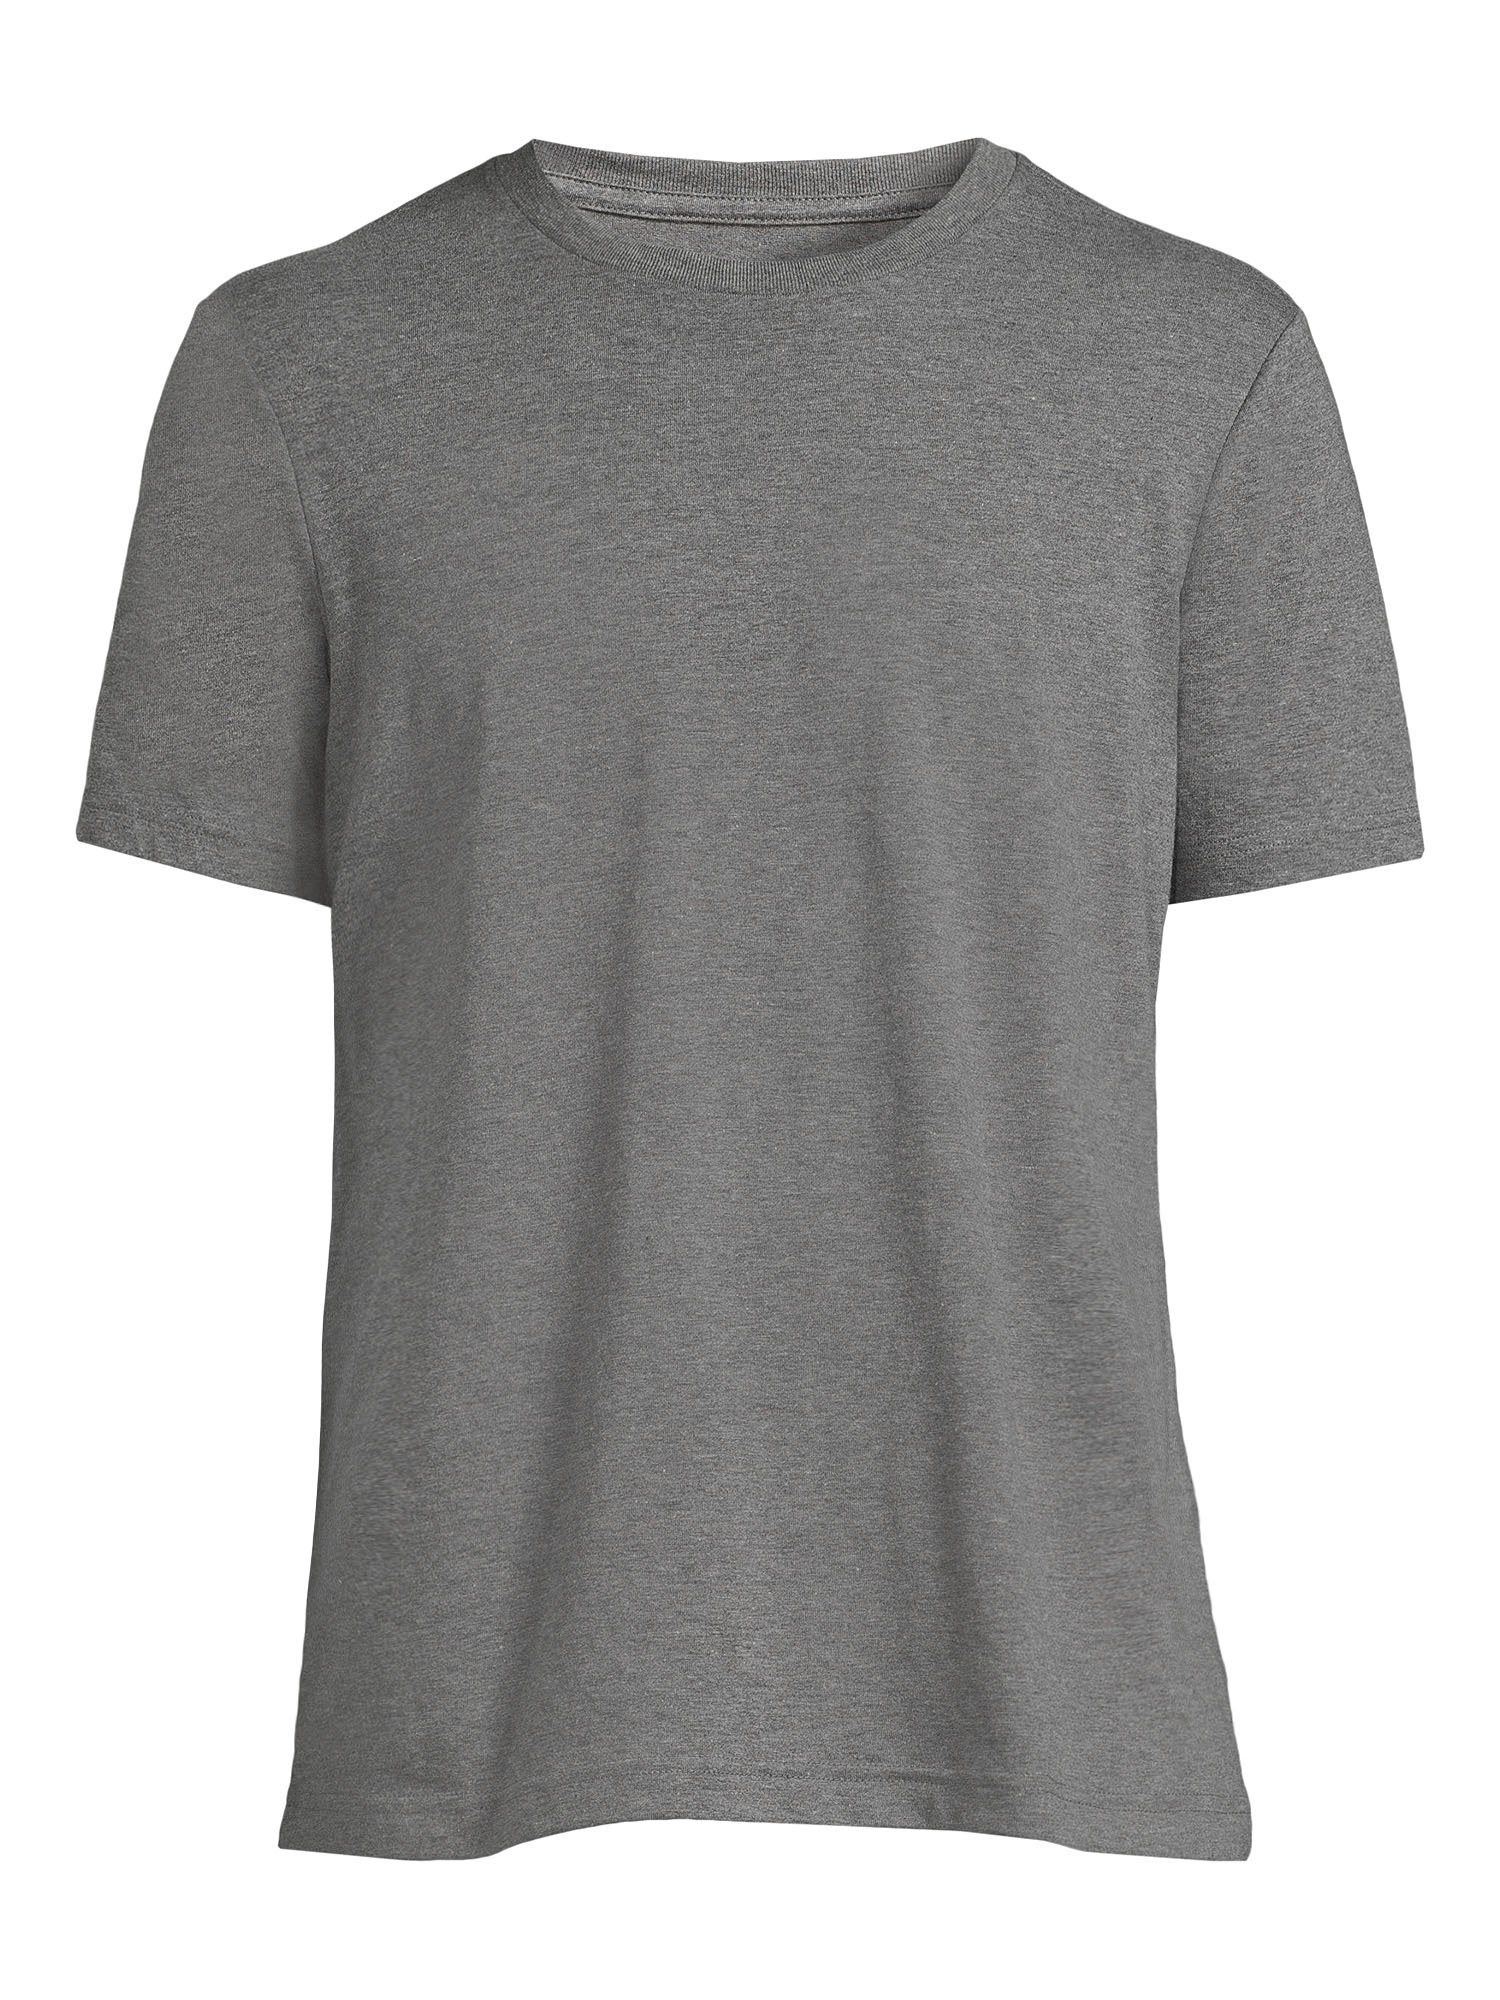 George Men's & Big Men's Crewneck Tee with Short Sleeves, Sizes XS-3XL - image 5 of 5